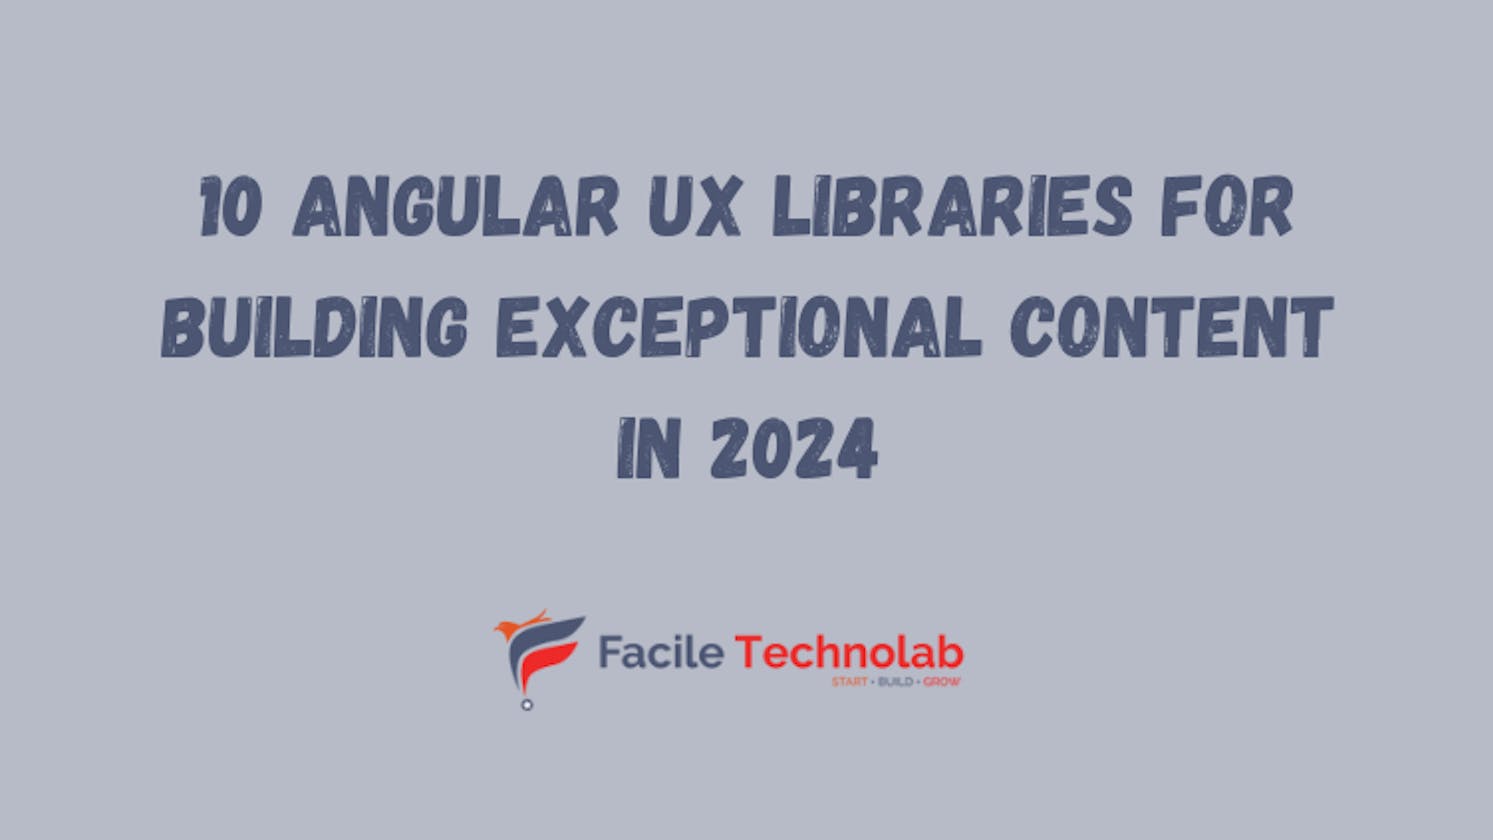 10 Angular UX Libraries for Building Exceptional User Experience in 2024